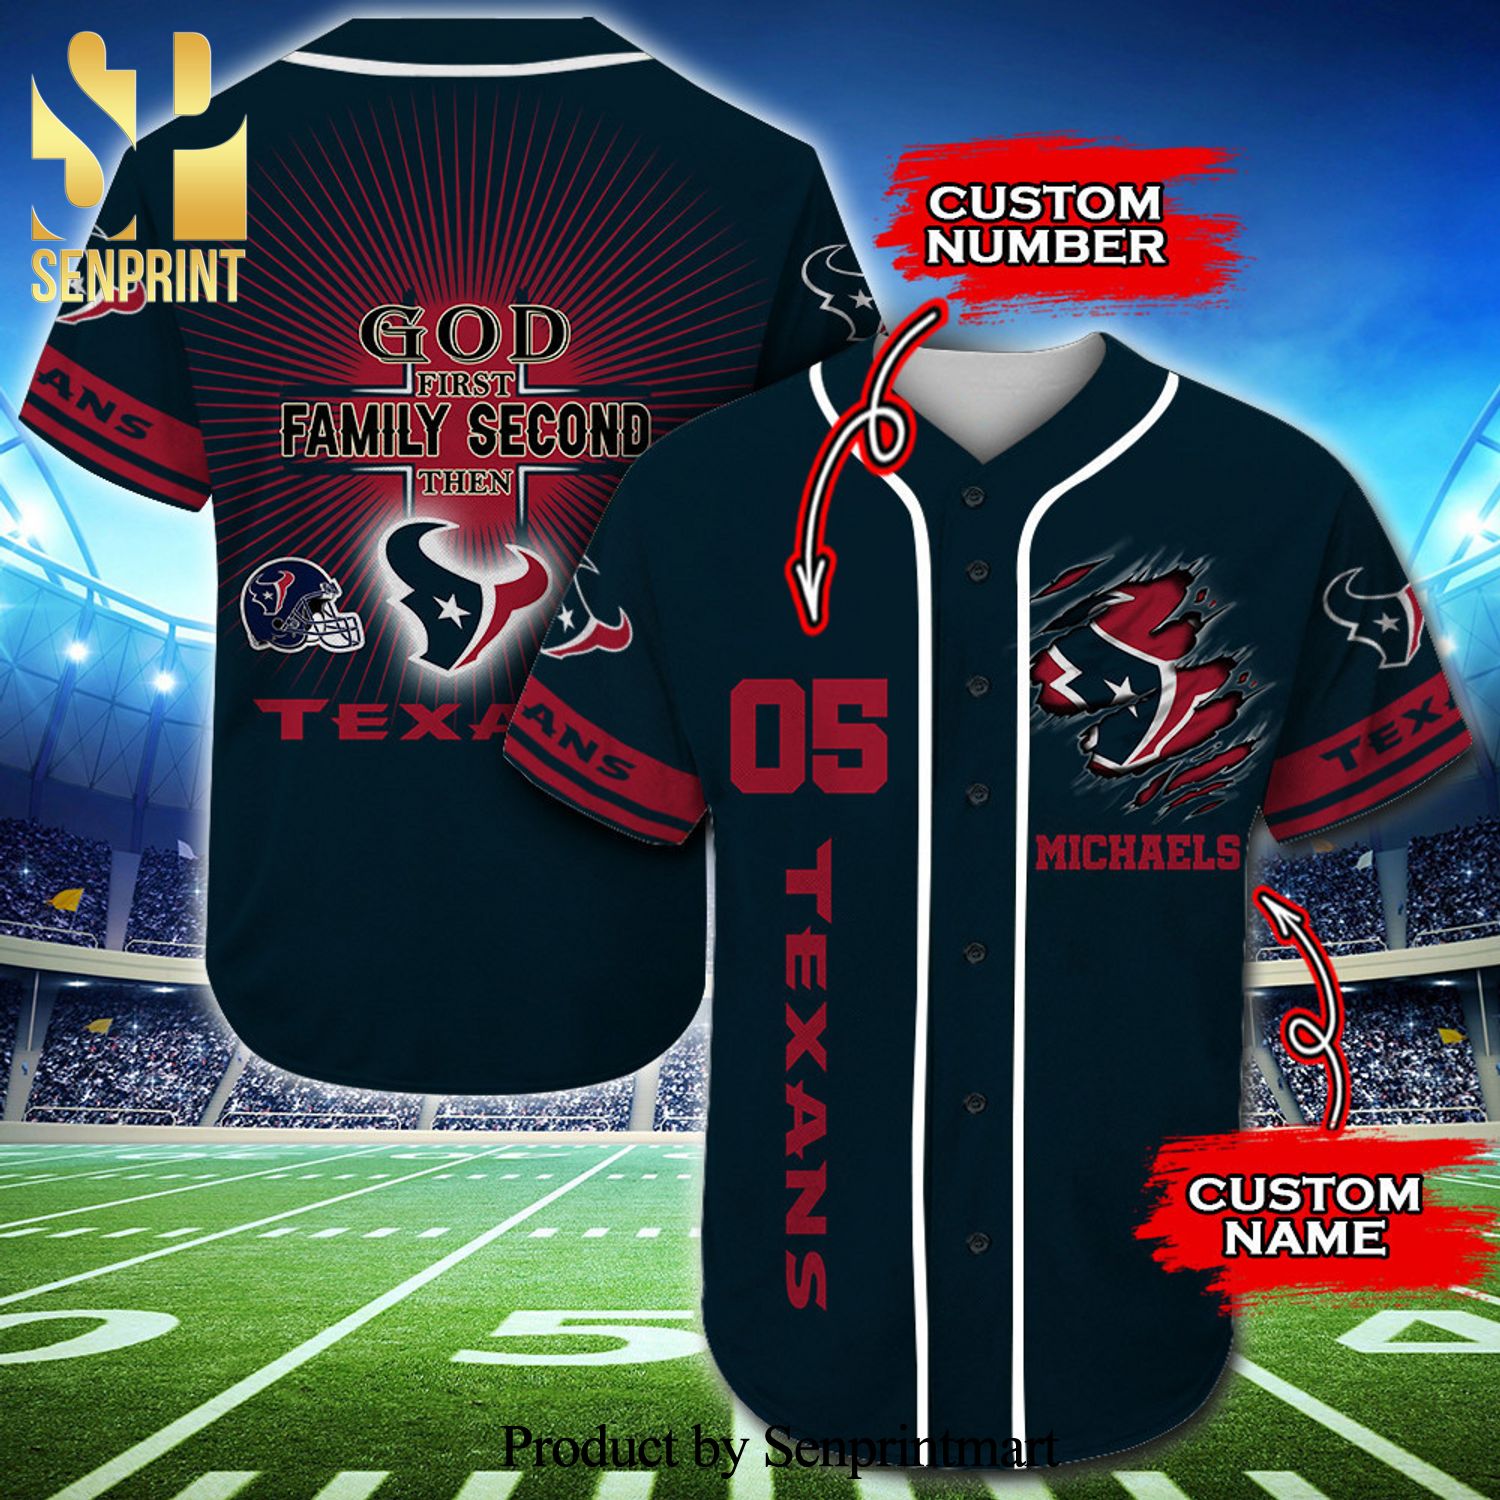 Personalized Houston Texans God First Family Second Full Printing Baseball Jersey